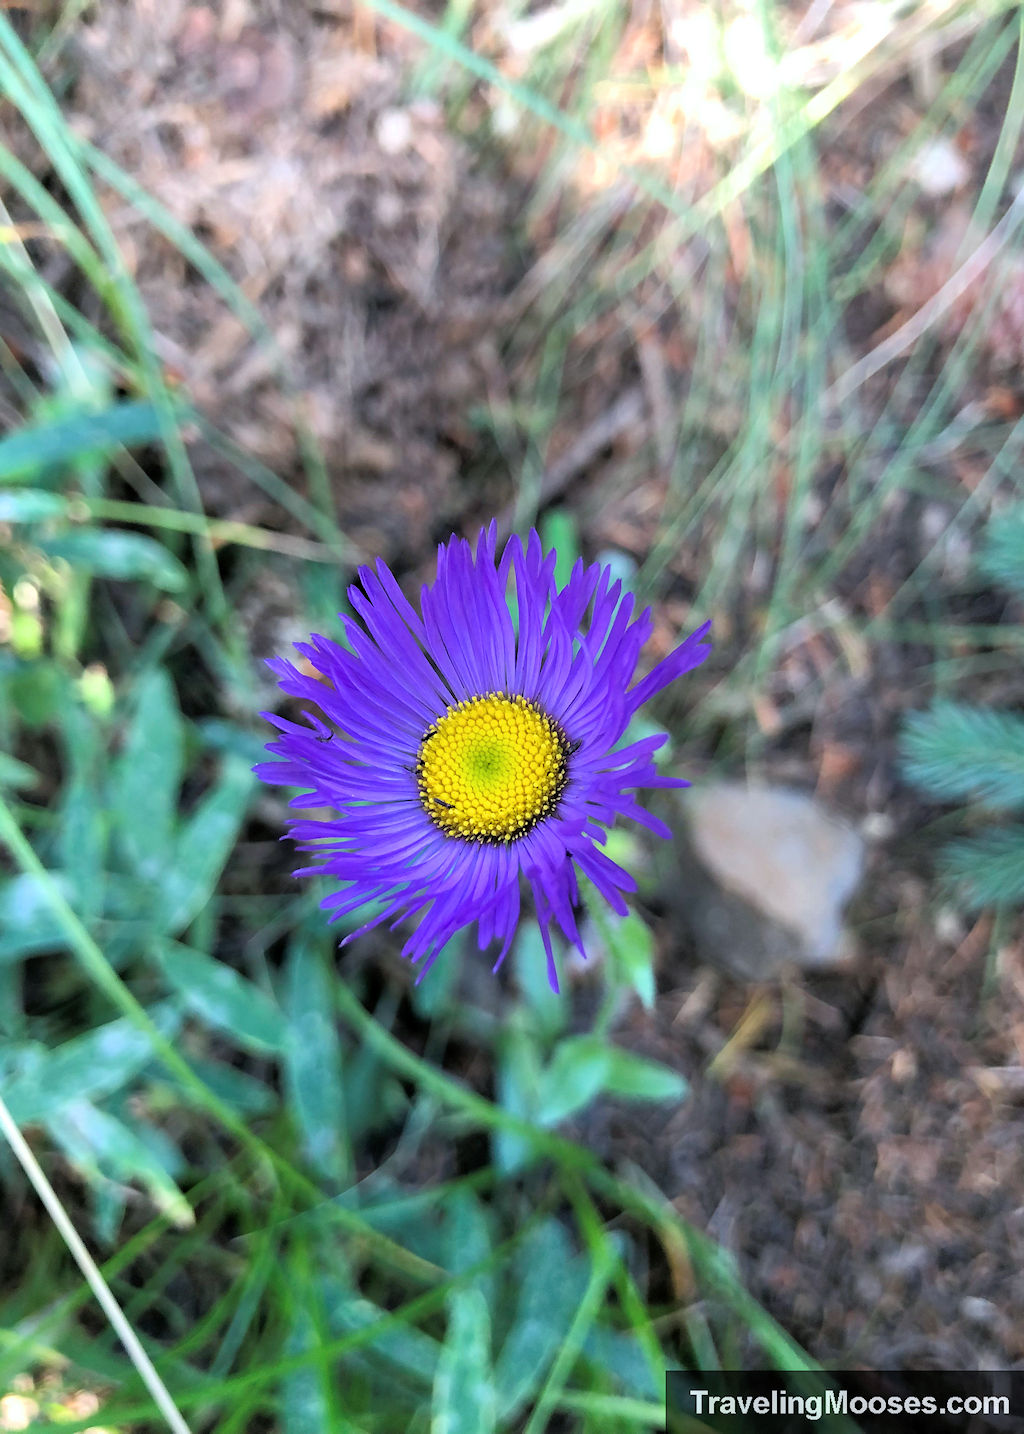 A purple wildflower with a bright yellow center